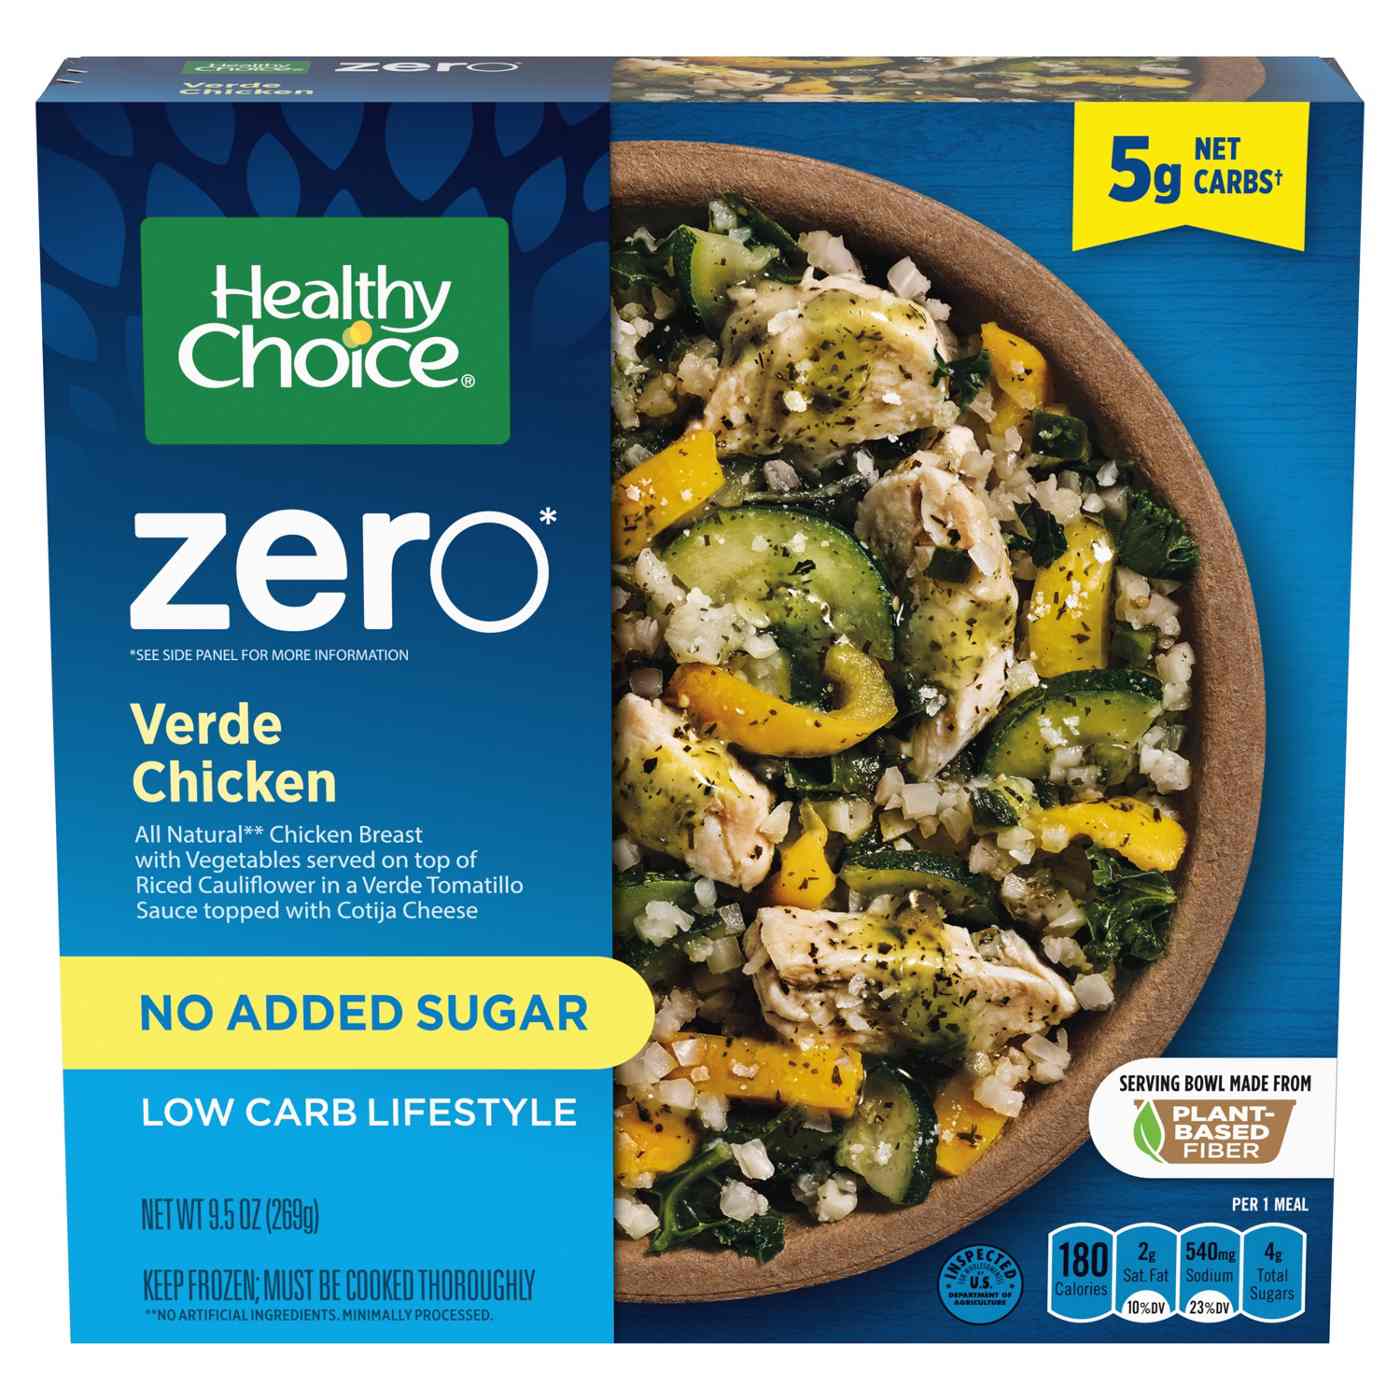 Healthy Choice Zero Low Carb Lifestyle Verde Chicken Frozen Meal; image 1 of 7